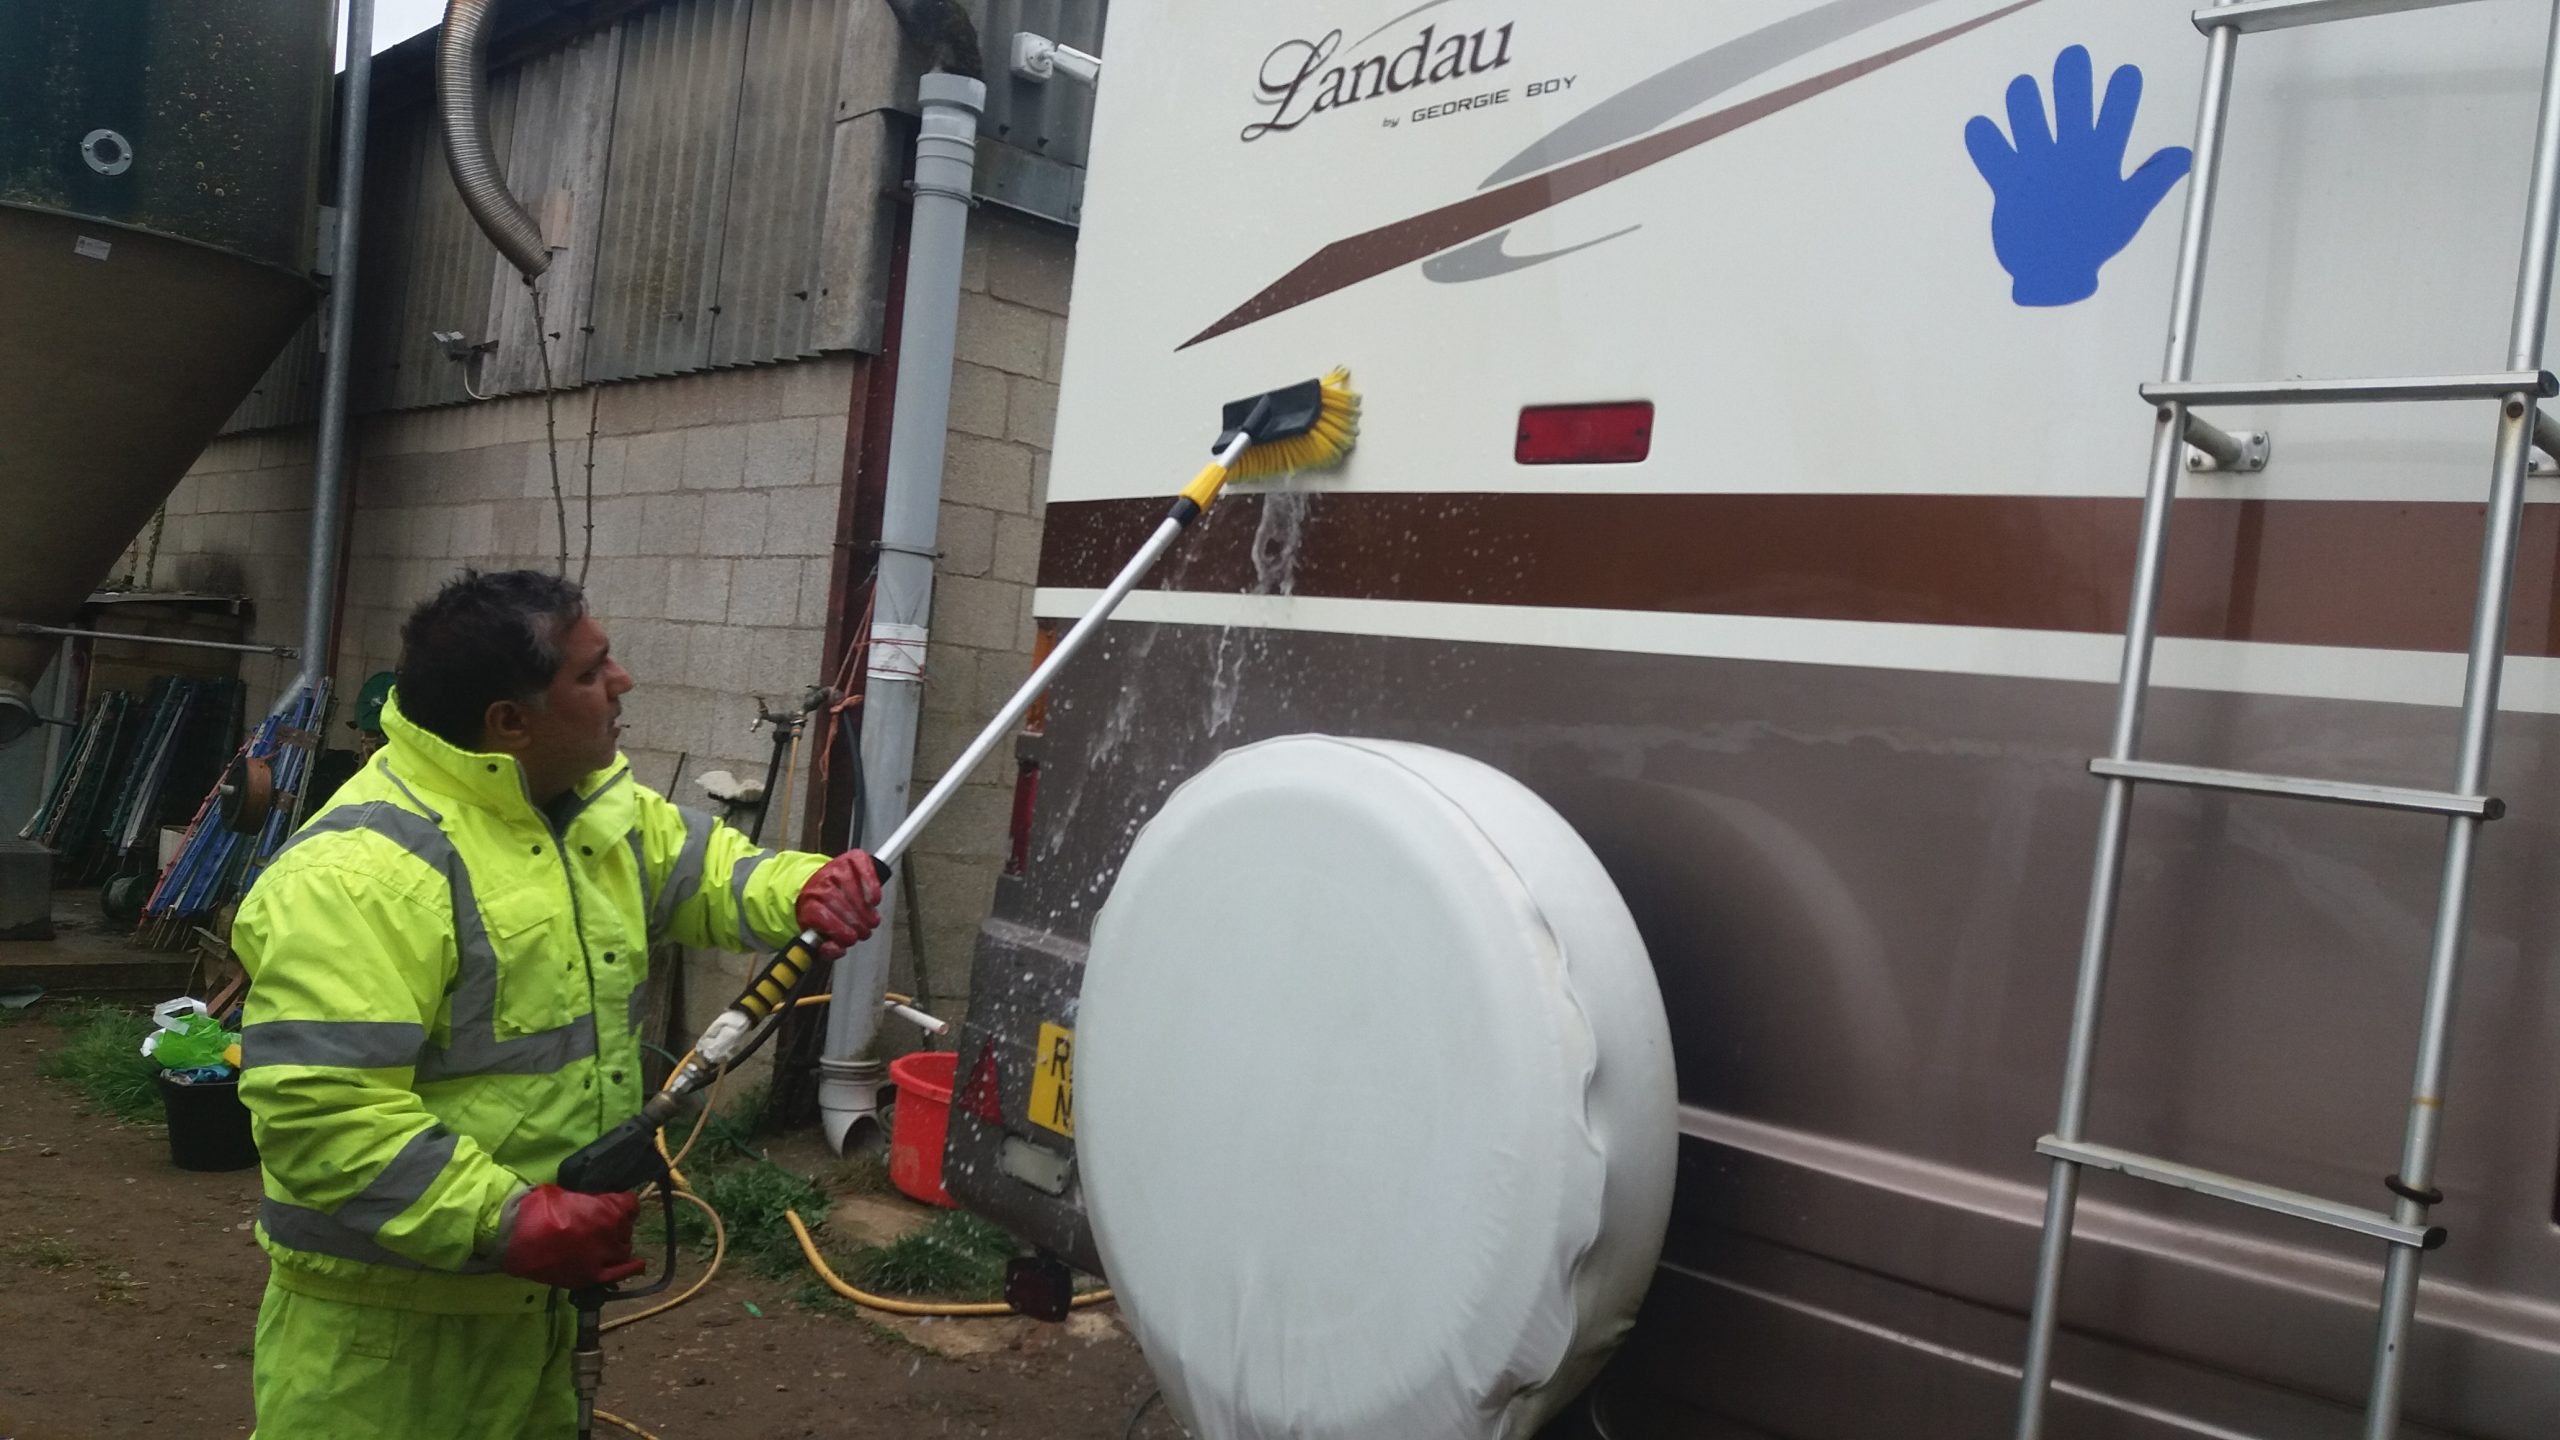 RV Cleaning Service